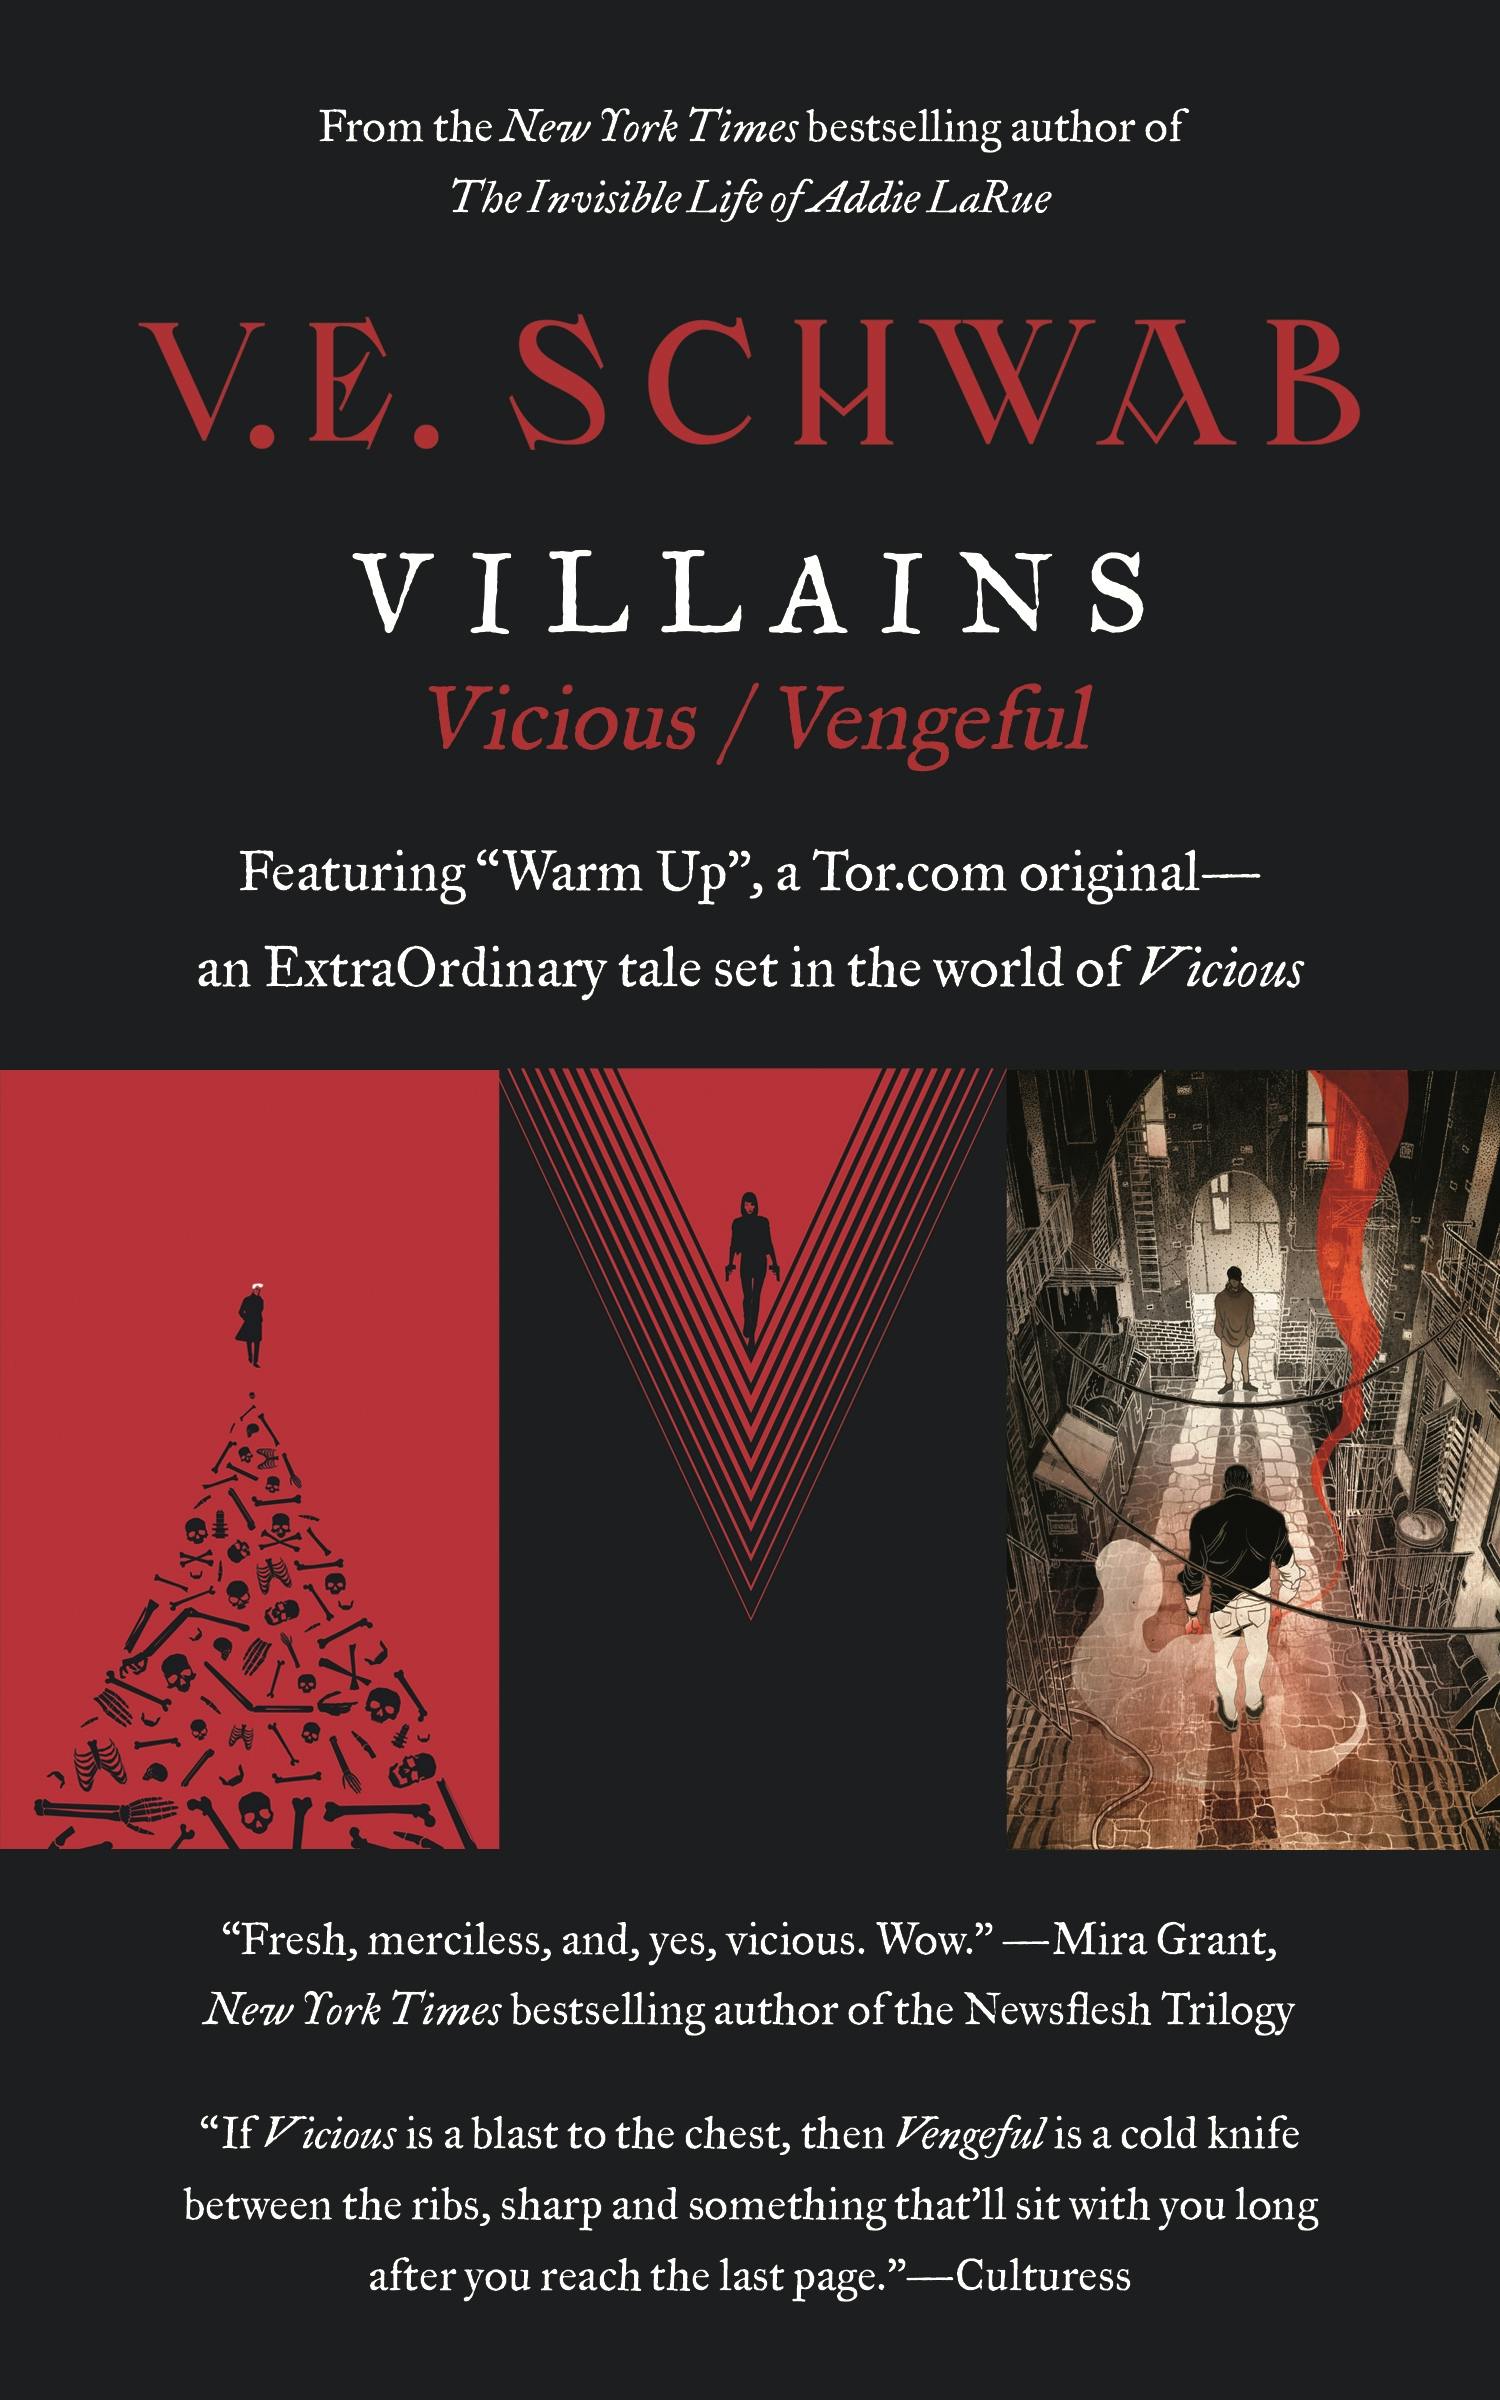 Cover for the book titled as: Villains Series